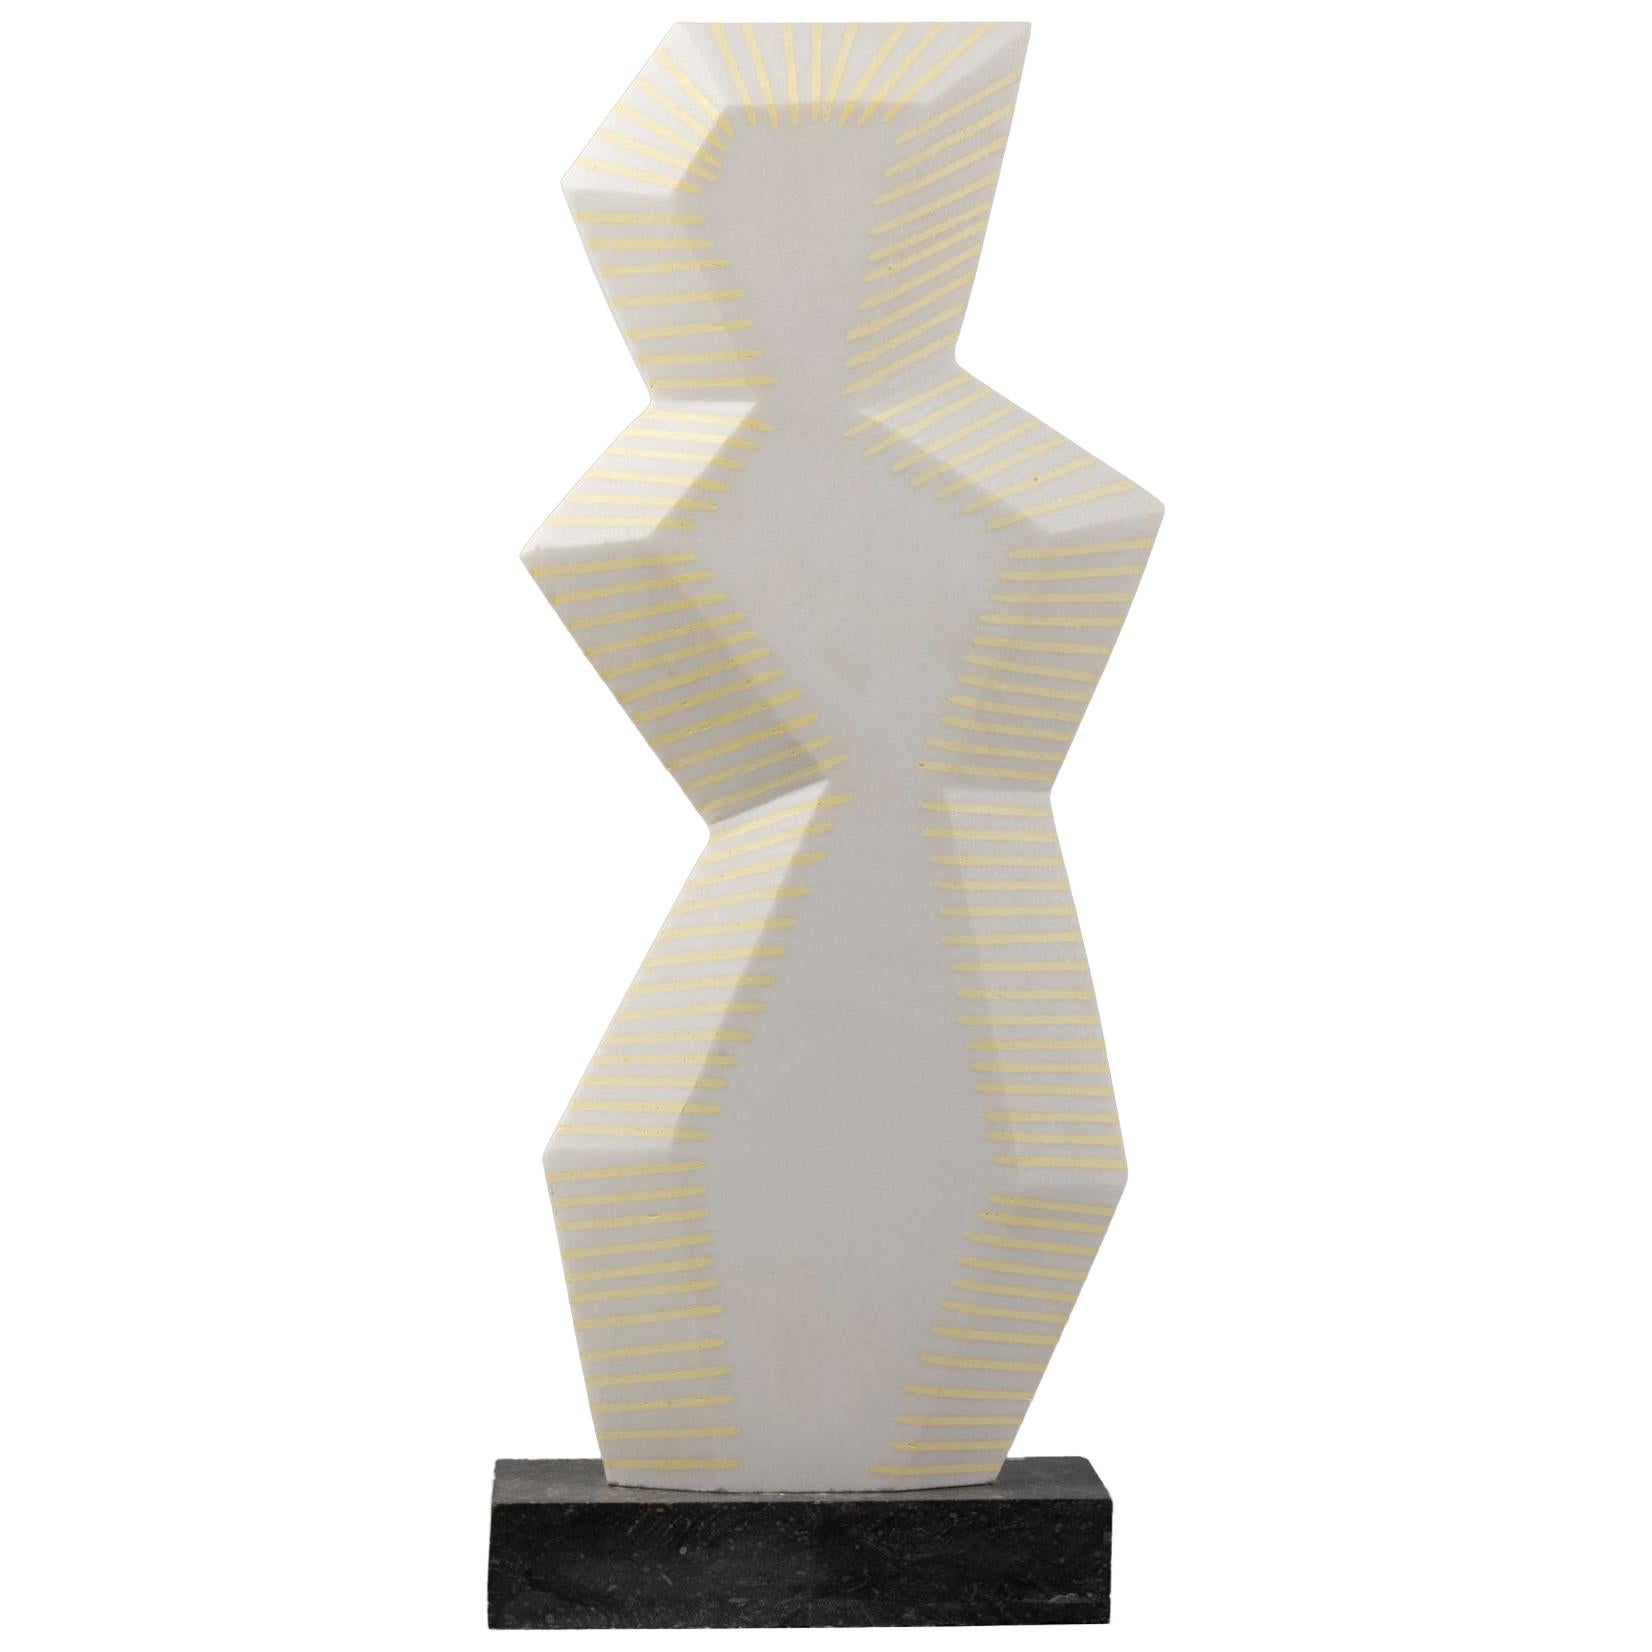 One of a Kind White Carrara Marble Sculpture, "Woman", by SAVY, France, 2005 For Sale